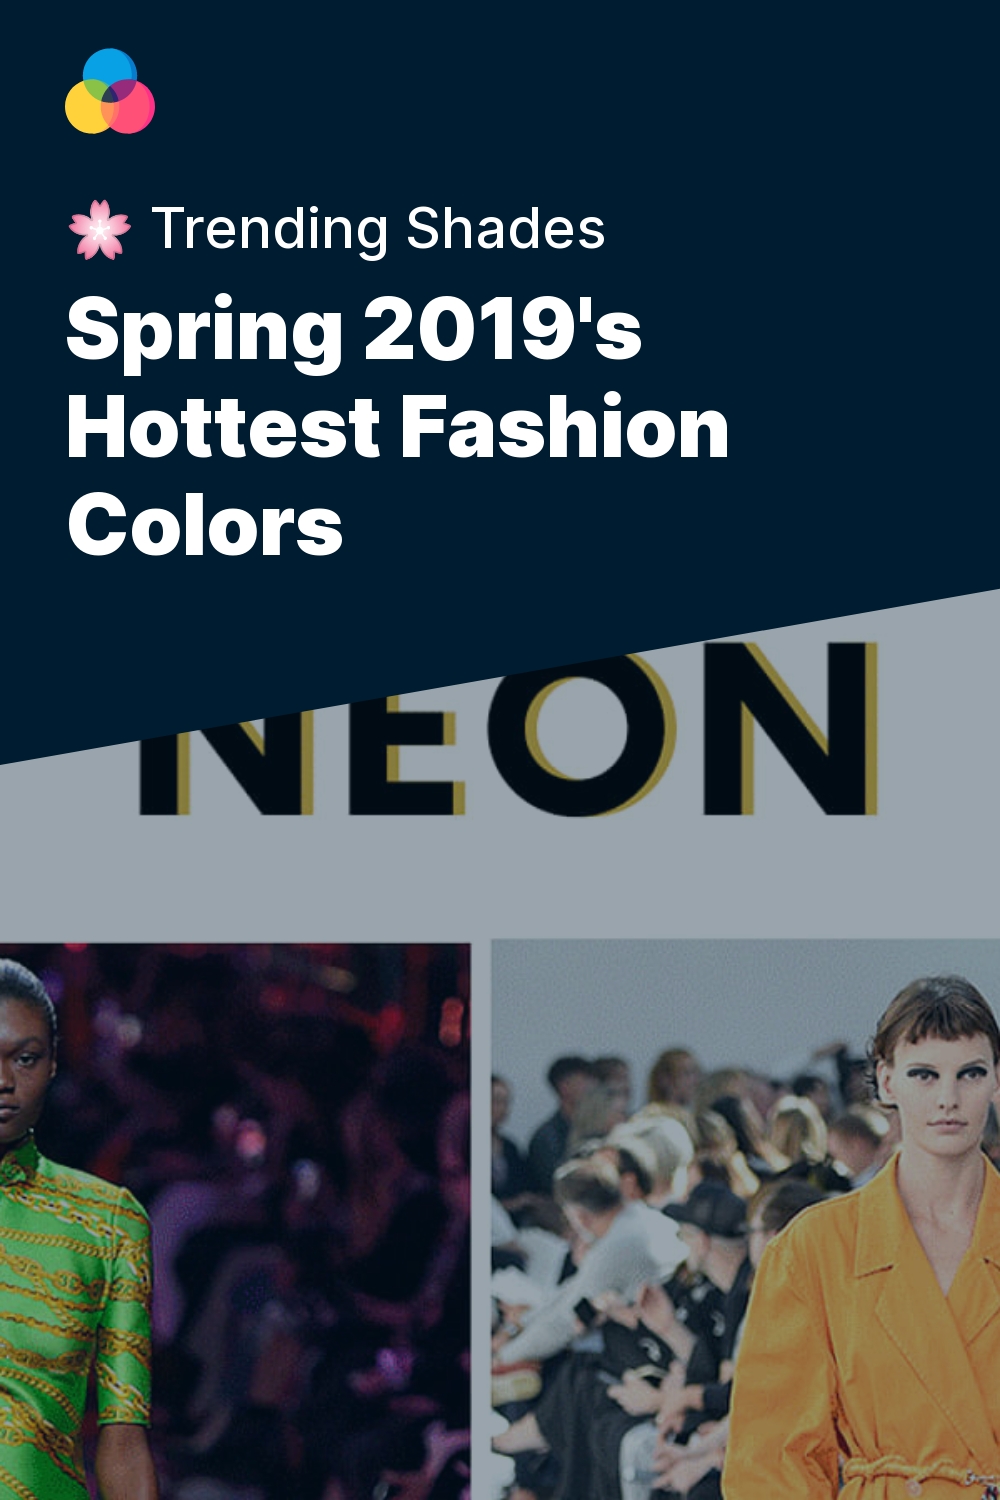 Spring 2019's Hottest Fashion Colors - 🌸 Trending Shades